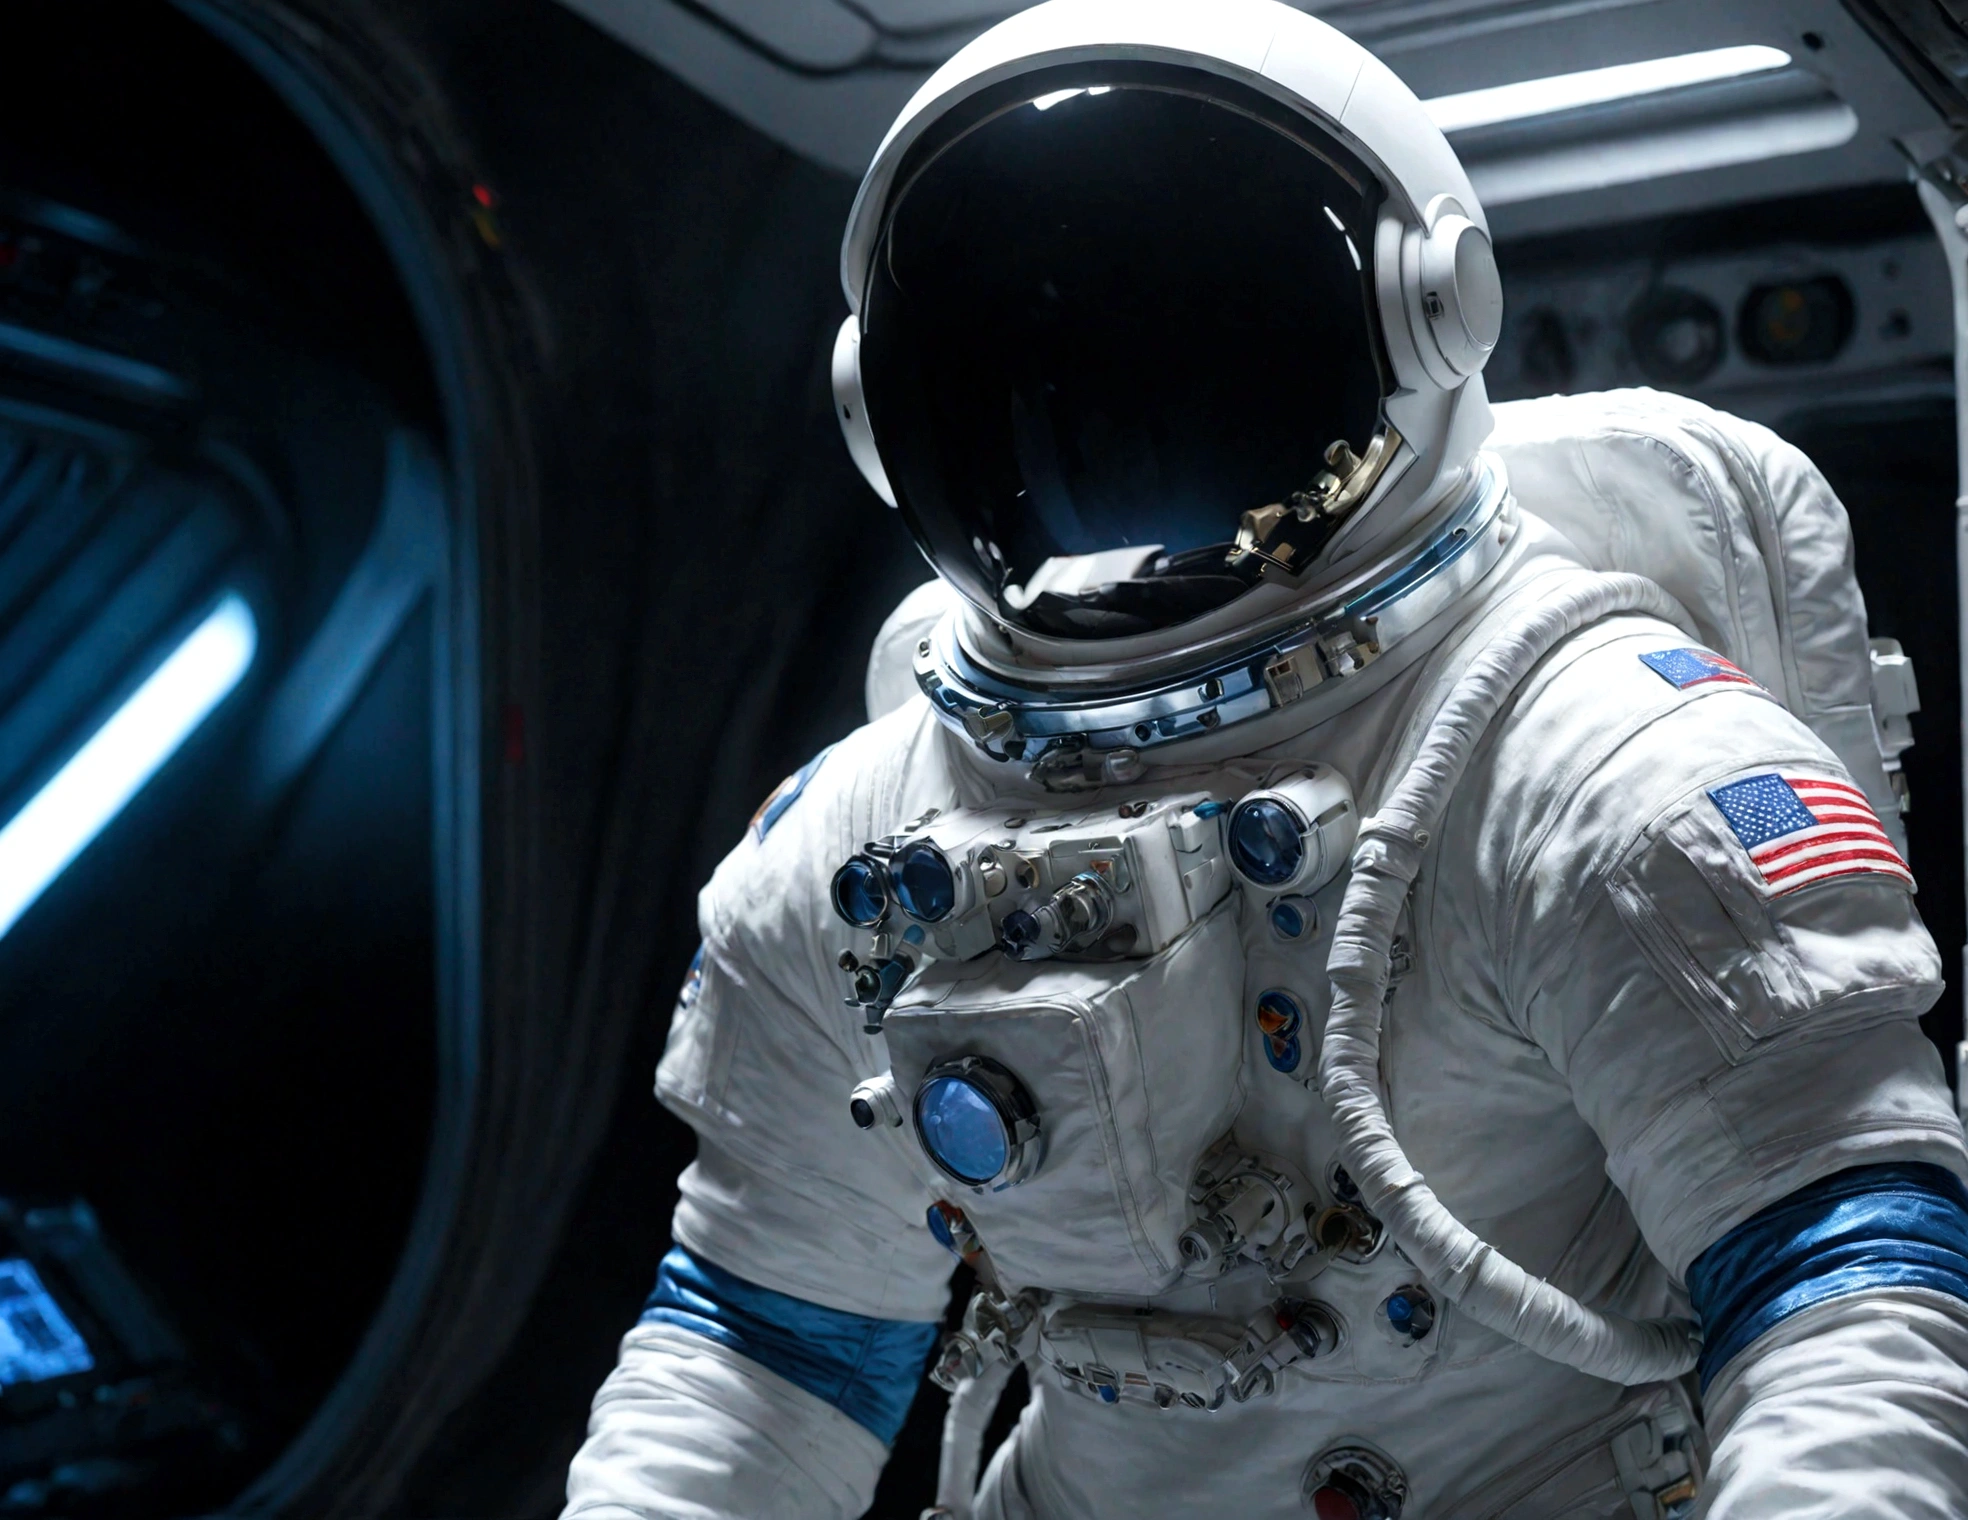 The astronaut is a 30-year-old man.., white and blue metallic clothing ...